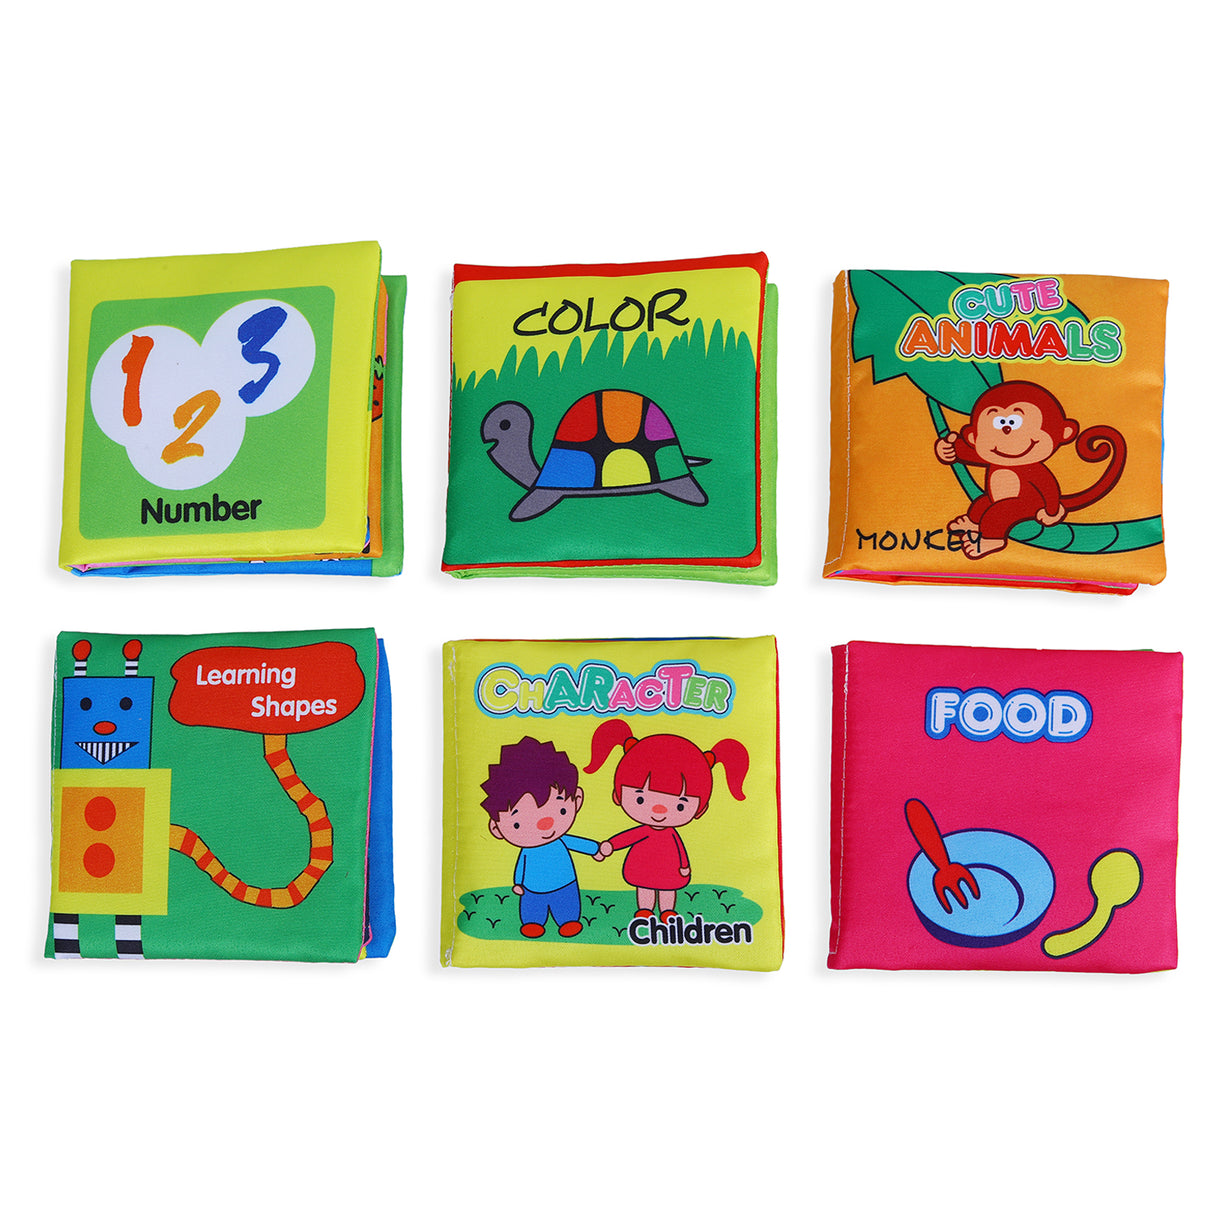 Baby Moo Numbers Animals Shapes Colours Food Characters Educational Cloth Book with Sound Paper Set of 6 Multicolour